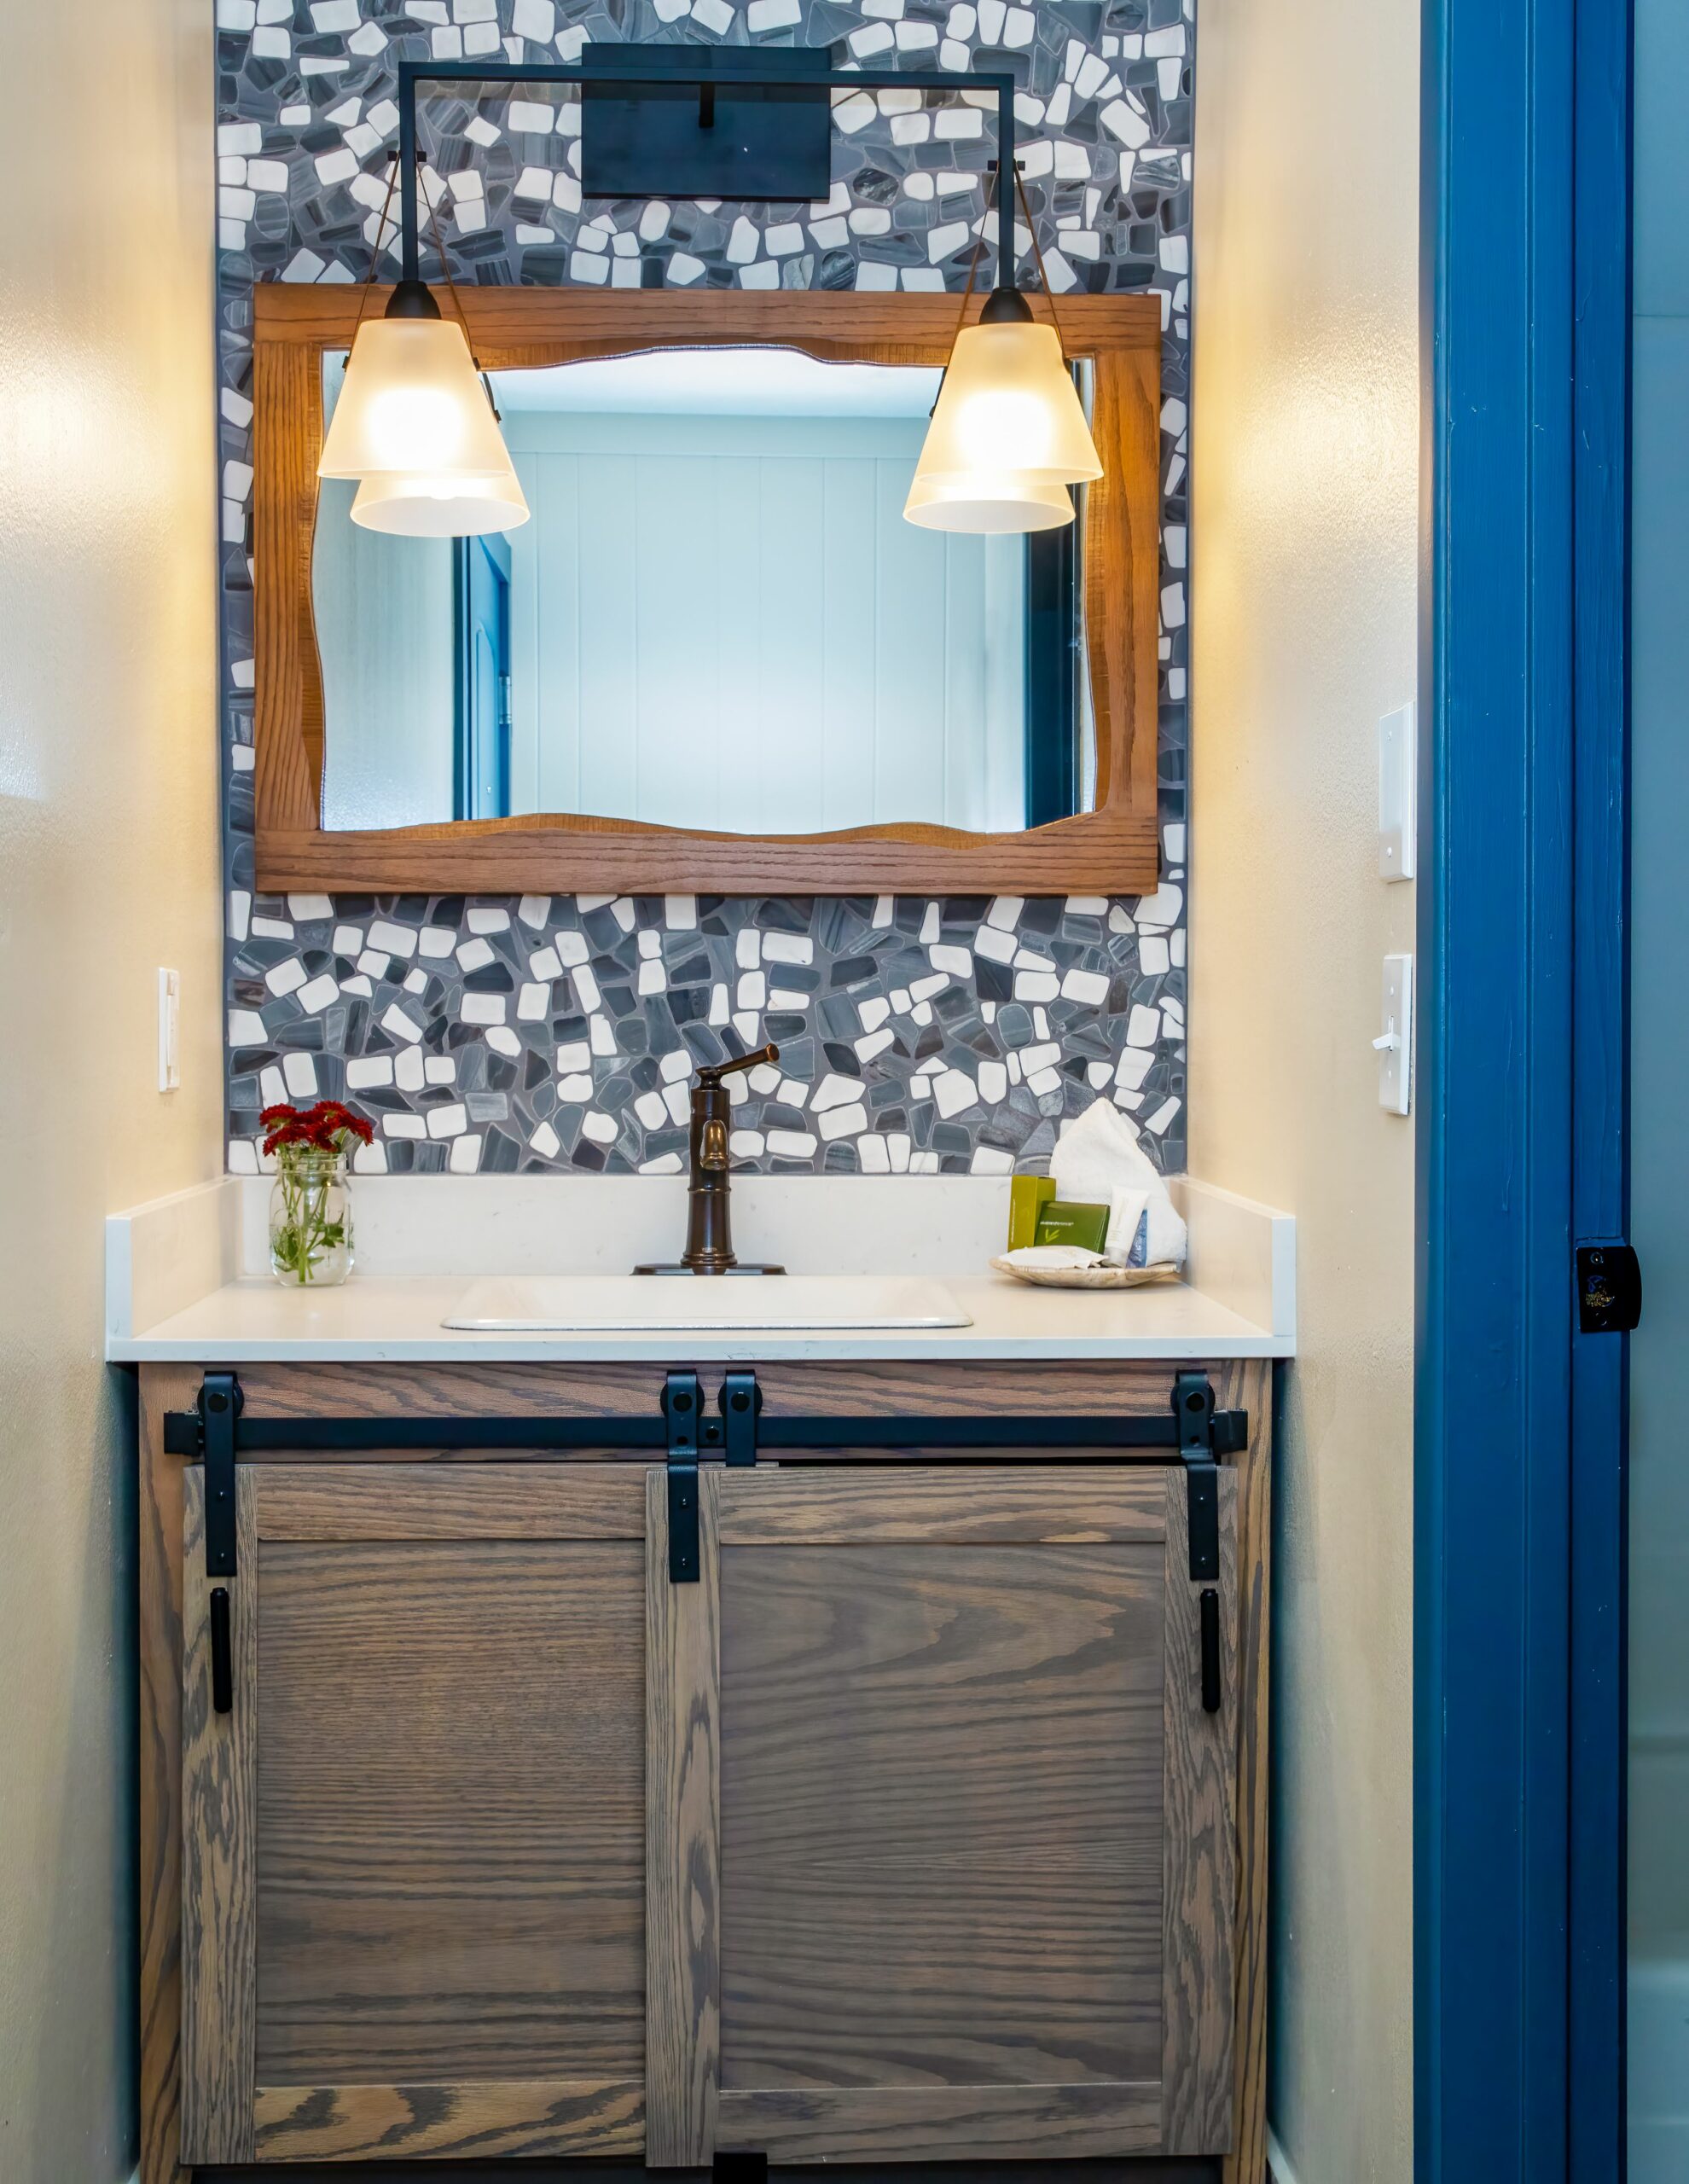 Sophisticated marble-finished bathroom, a mirror above the washbasin, adorned with stylish lighting fixtures.